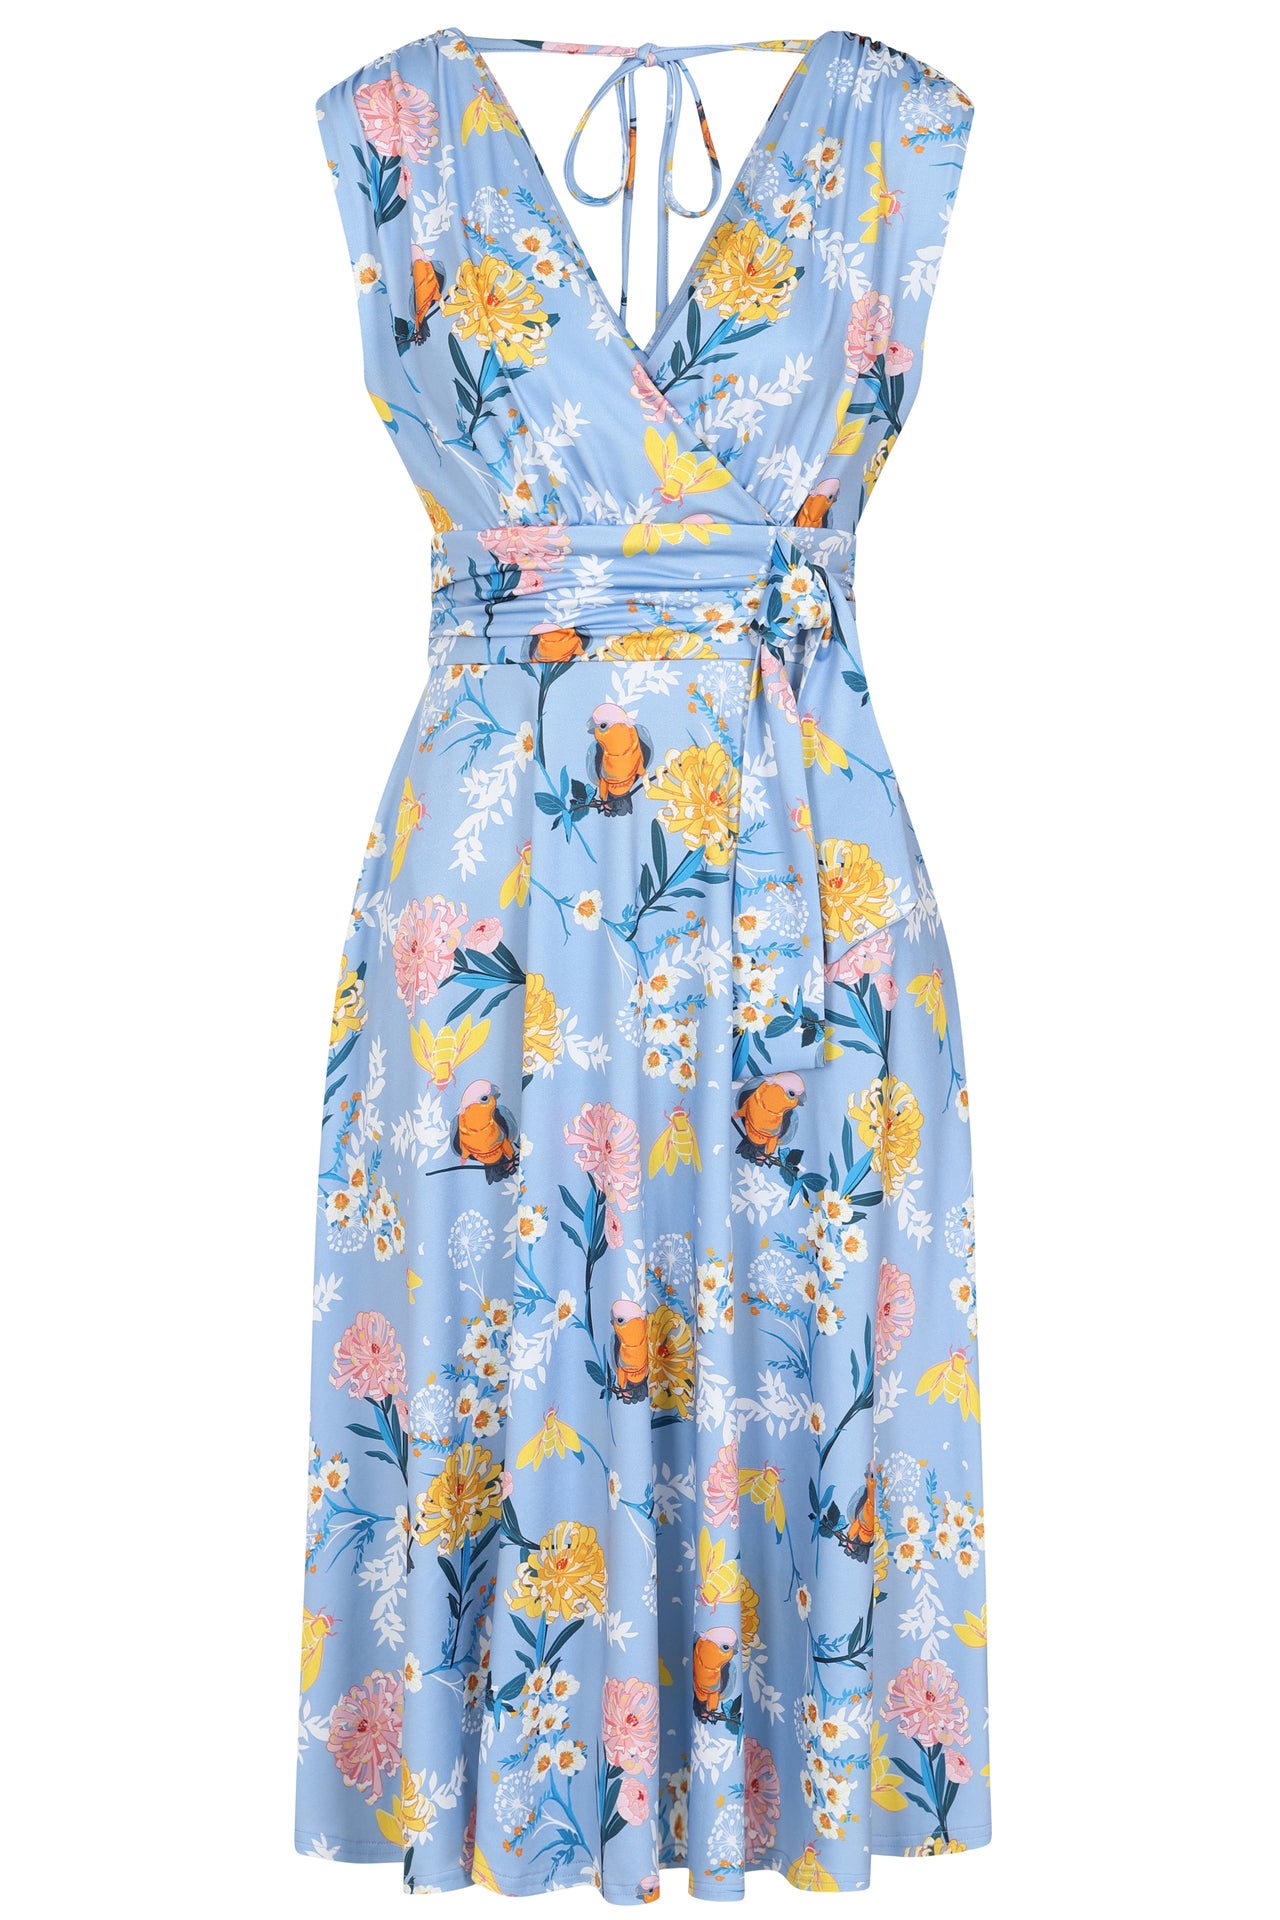 Arabella Dress - Birds and the Bees